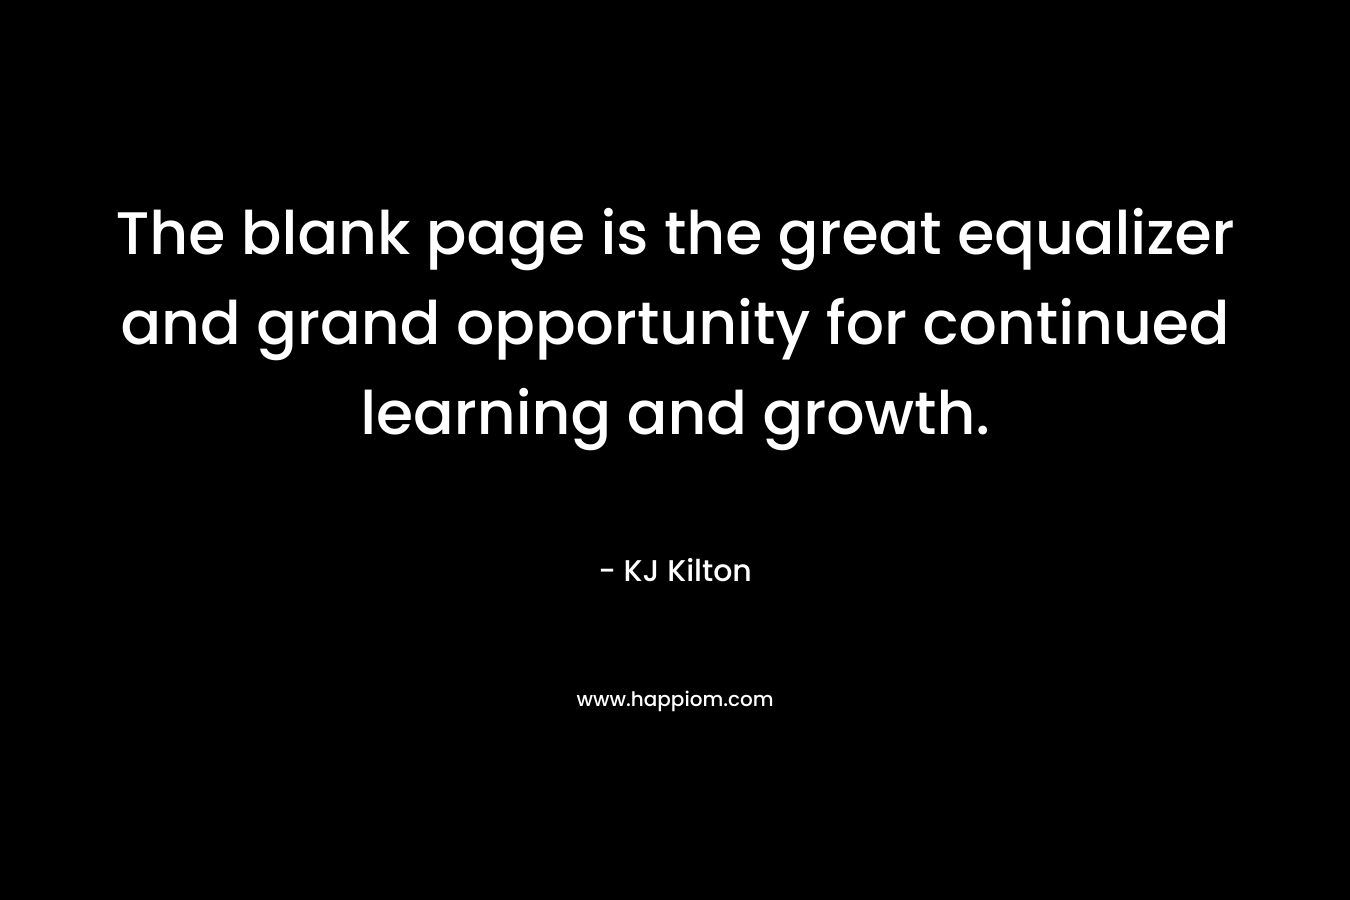 The blank page is the great equalizer and grand opportunity for continued learning and growth. – KJ Kilton